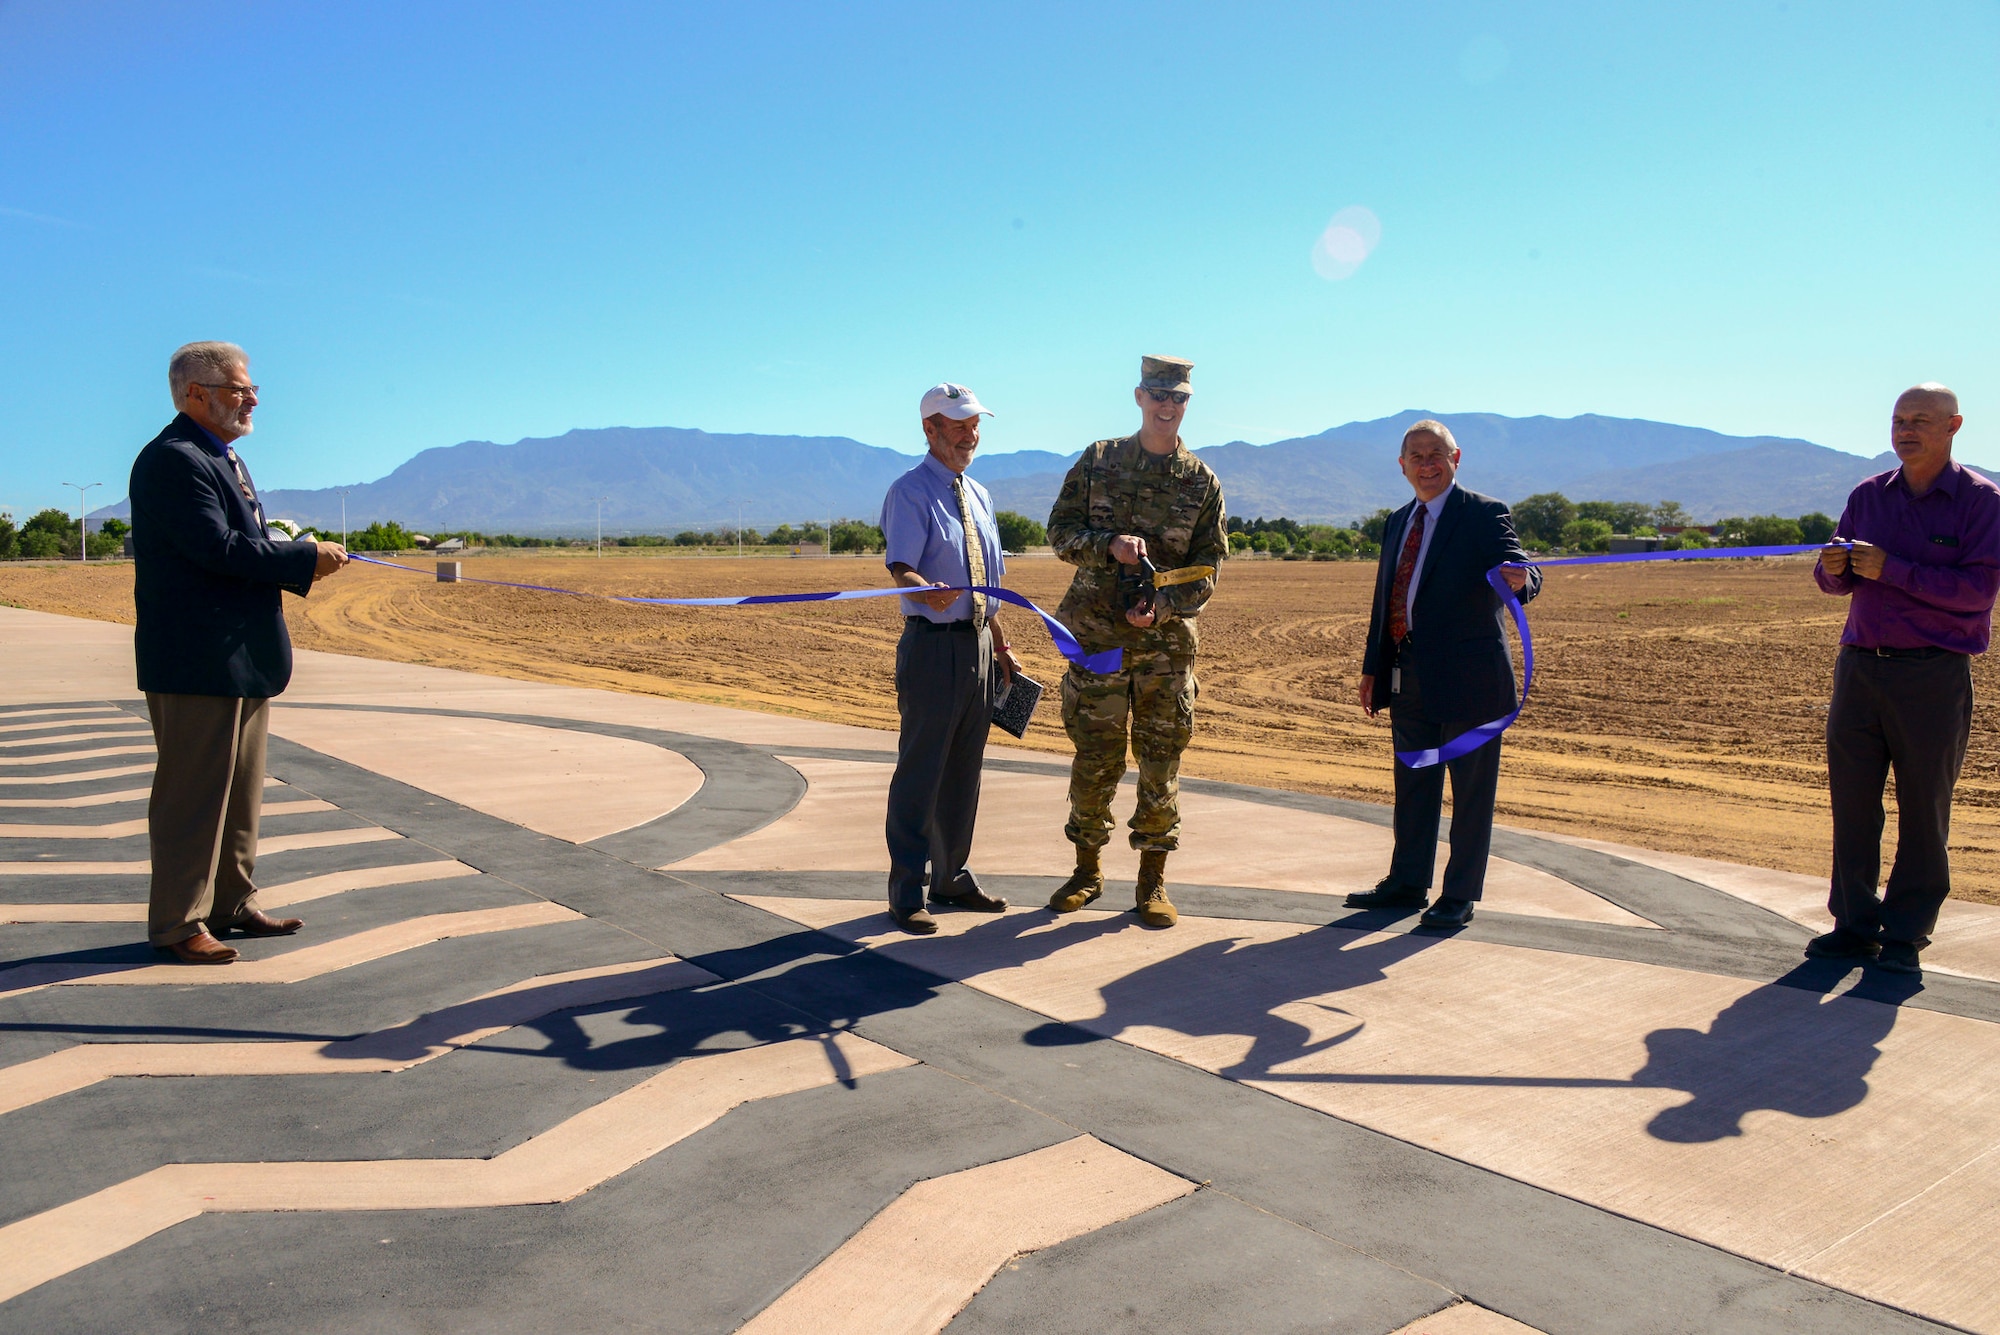 Col. Richard Gibbs, Mr. Jerry Lovato and other city and Albuquerque Metropolitan Arroyo Flood Control Authority members cut a ribbon at an official ceremony recognizing the Louisiana Gibson Regional Drainage Facility completion at Kirtland June 19, 2019. AMAFCA completed the project that was jointly funded by the Air Force, AMAFCA and the City of Albuquerque. The $2,520,000 project was designed for two major functions: a regional storm water detention facility and a realignment to the Gibson Gate. (U.S. Air Force photo by Jessie Perkins)